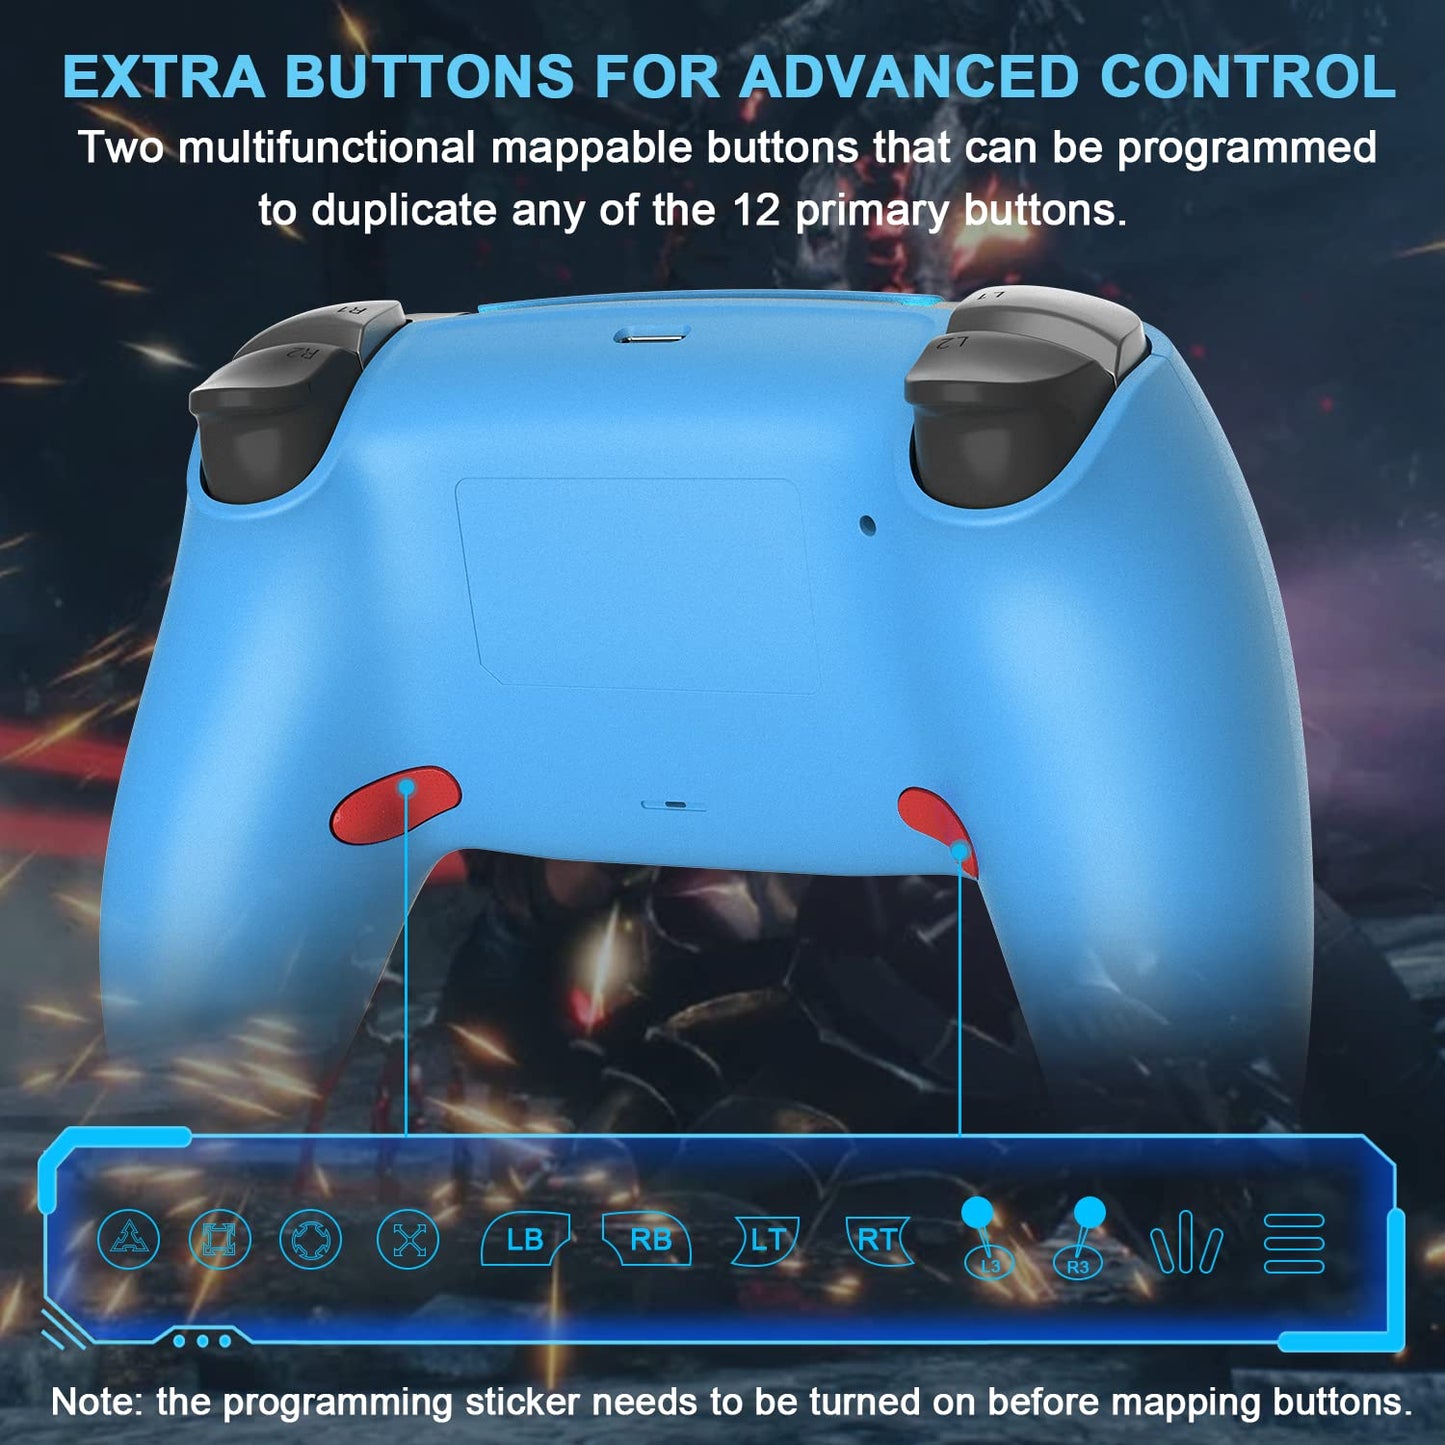 UGAME Ymir Gamepad for PS4 Controller, Elite Wireless Remote for Playstation 4 Controller Compatible with PS4/Slim/Pro/Steam/PC , with Upgraded Programming Function/Turbo/Motion Sensor/Dual Vibration( Blue)